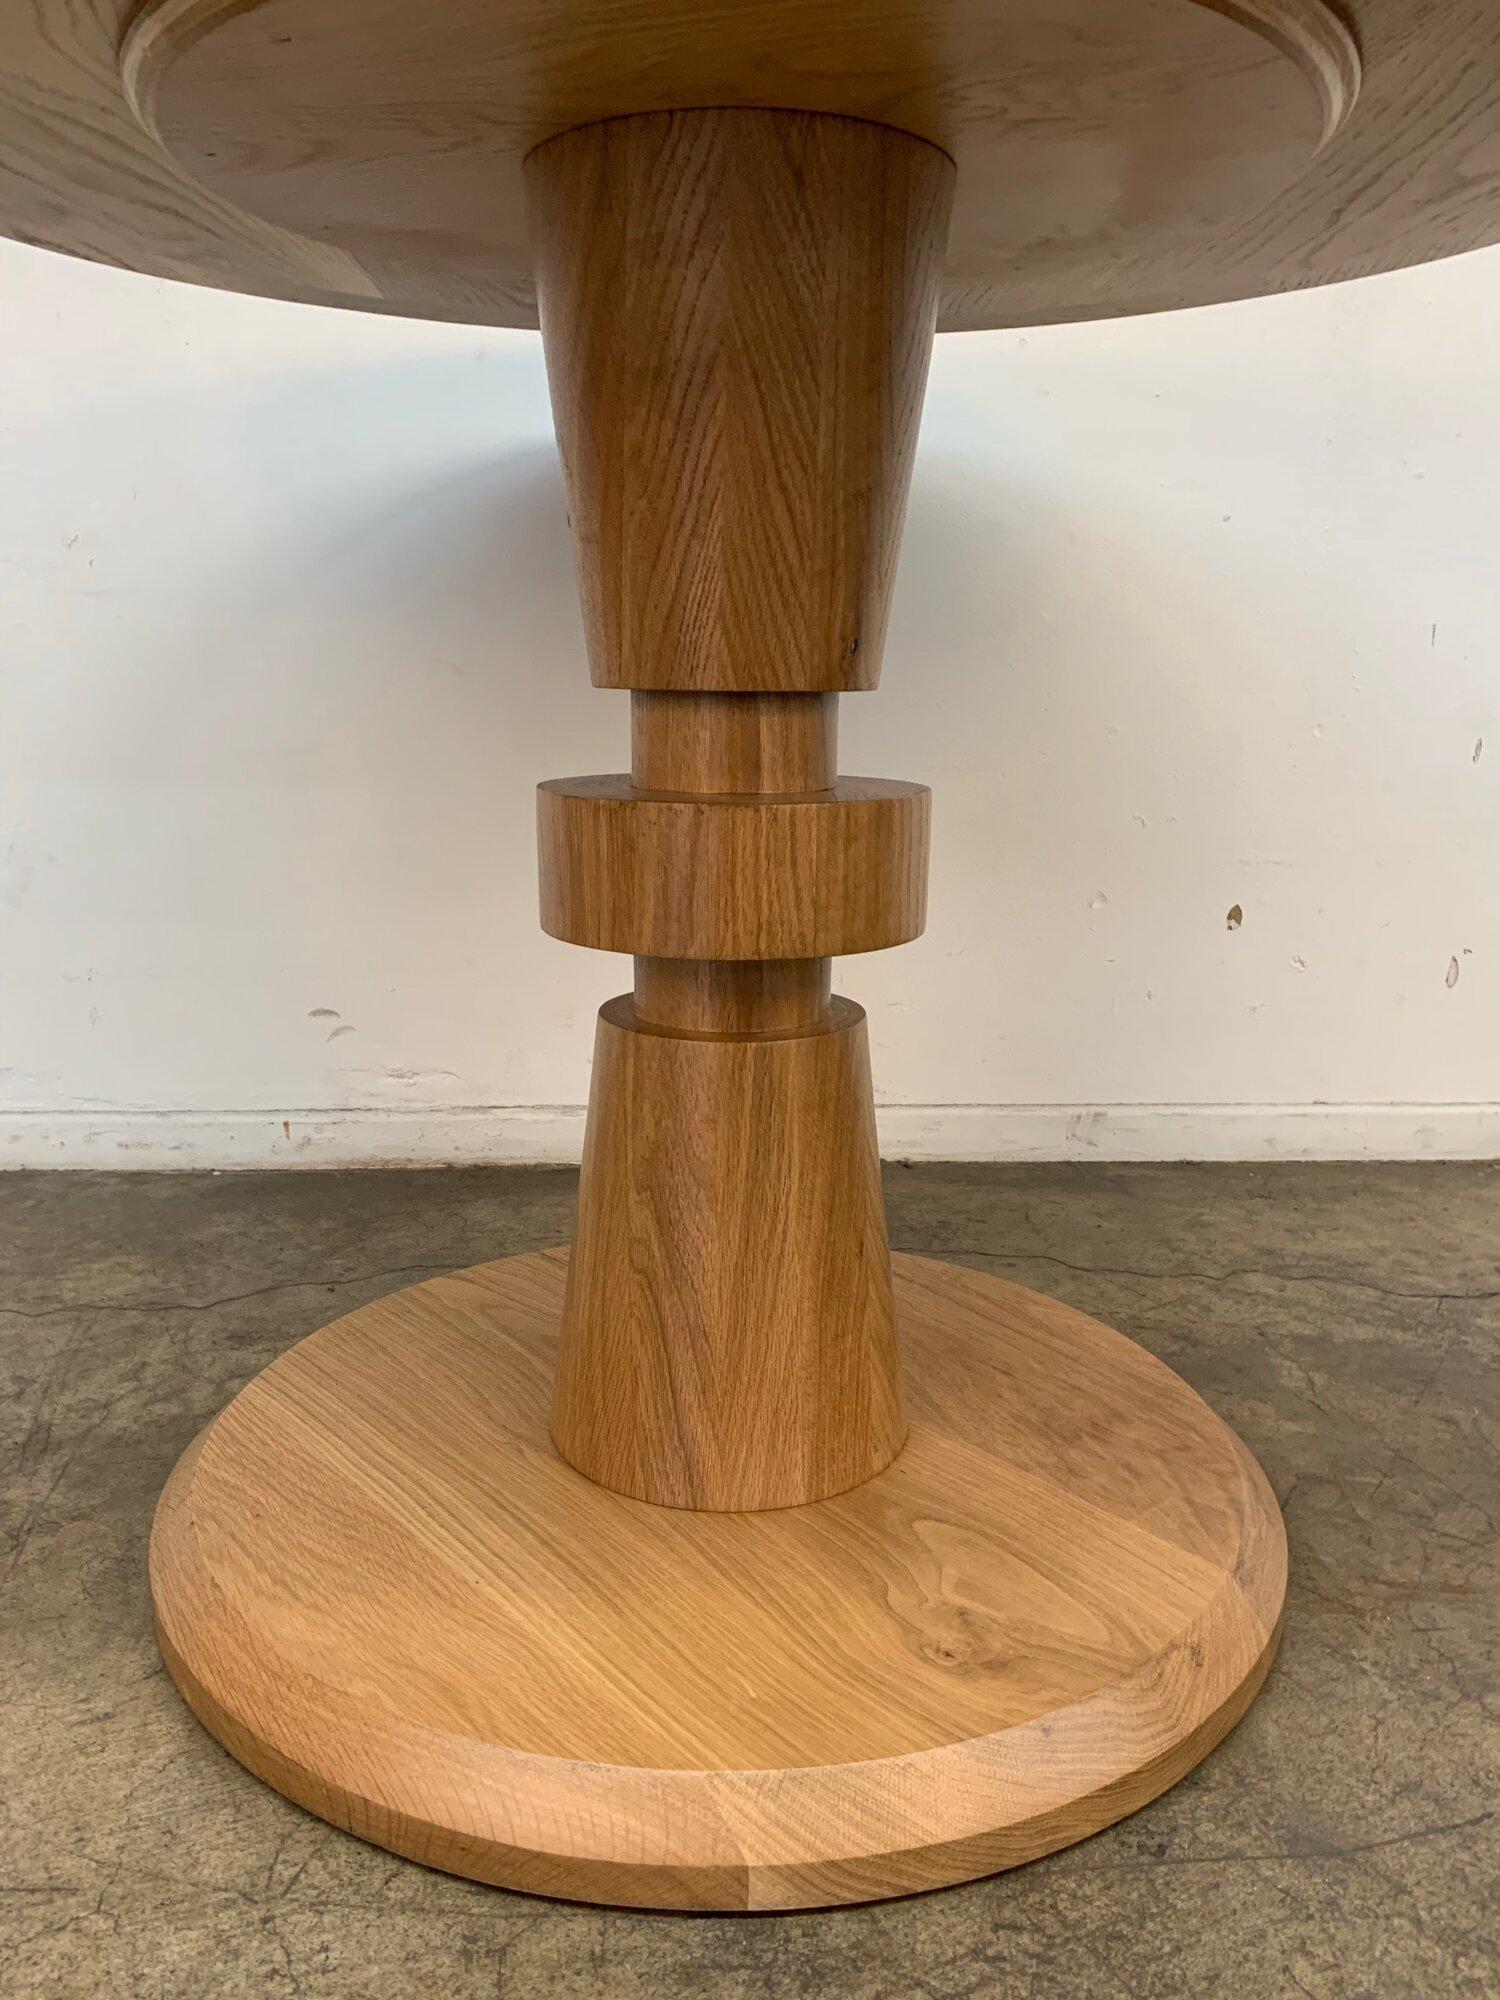 KC29.75
Forma dining table custom made here in Los Angeles. This table includes a clear natural finish, allowing for its organic form to be displayed as is, please note a clear coat does show natural imperfections in the wood. Finish can be